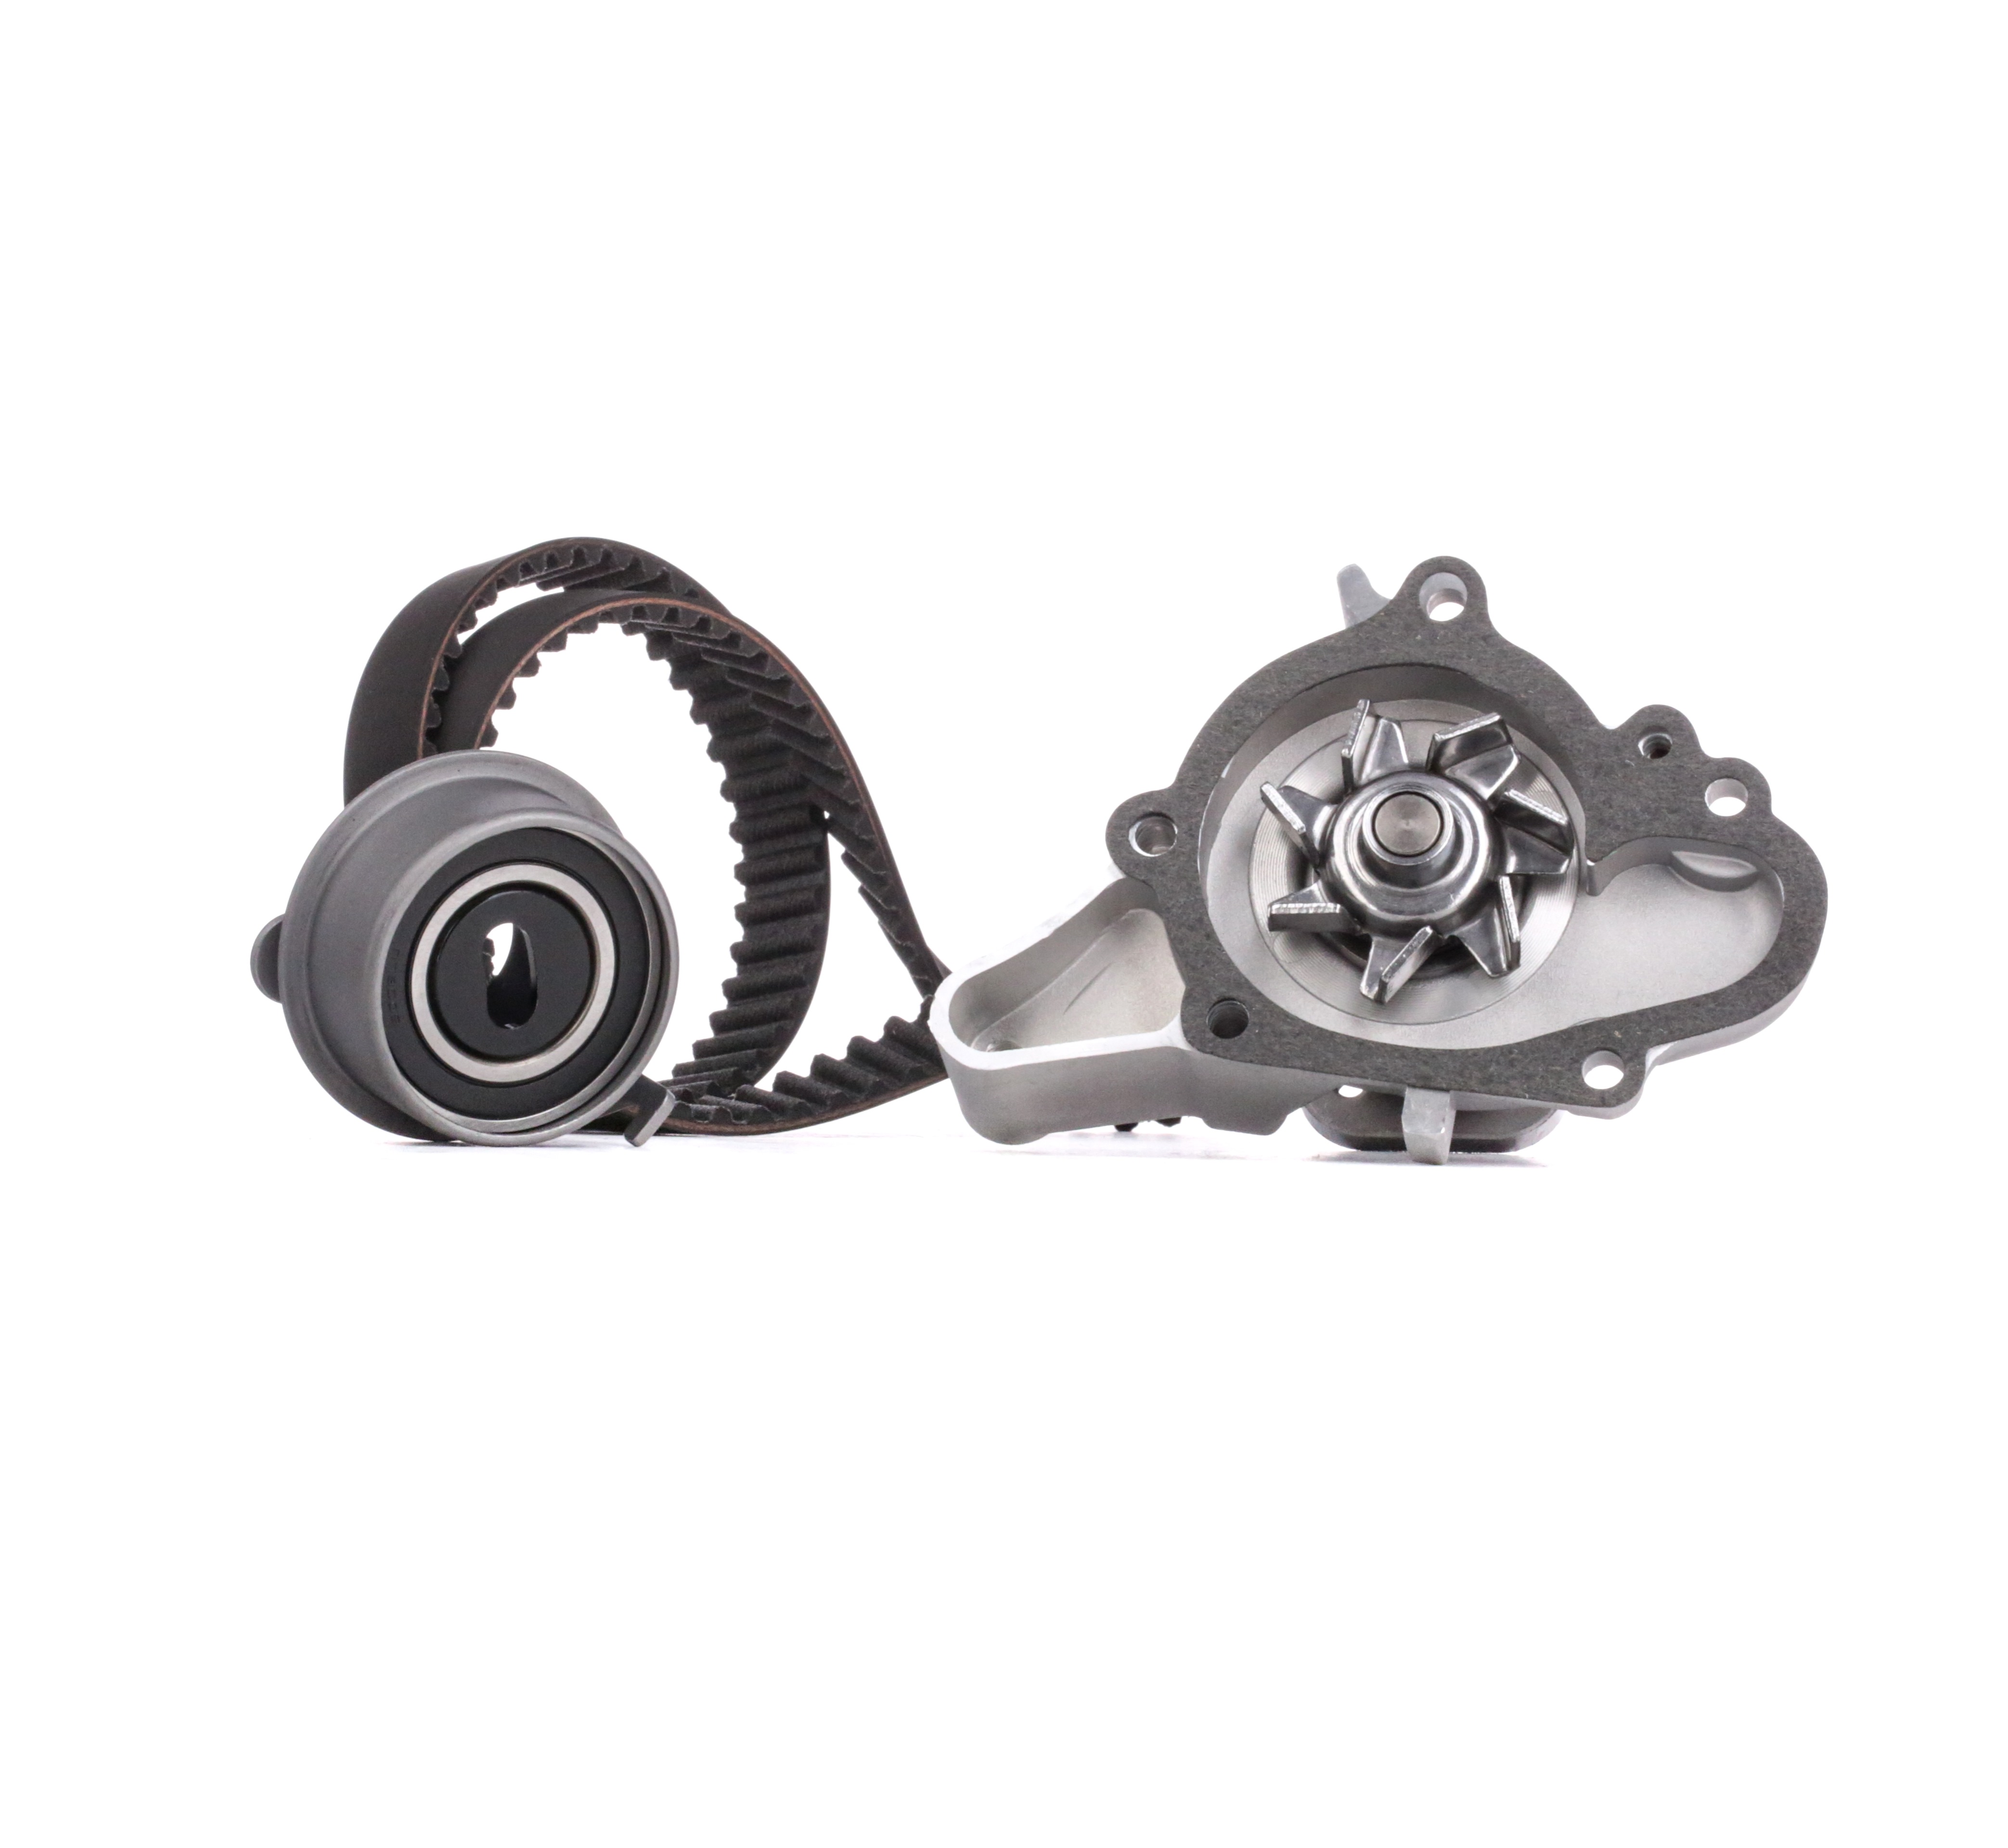 Kia PICANTO Water pump and timing belt kit STARK SKWPT-0750147 cheap